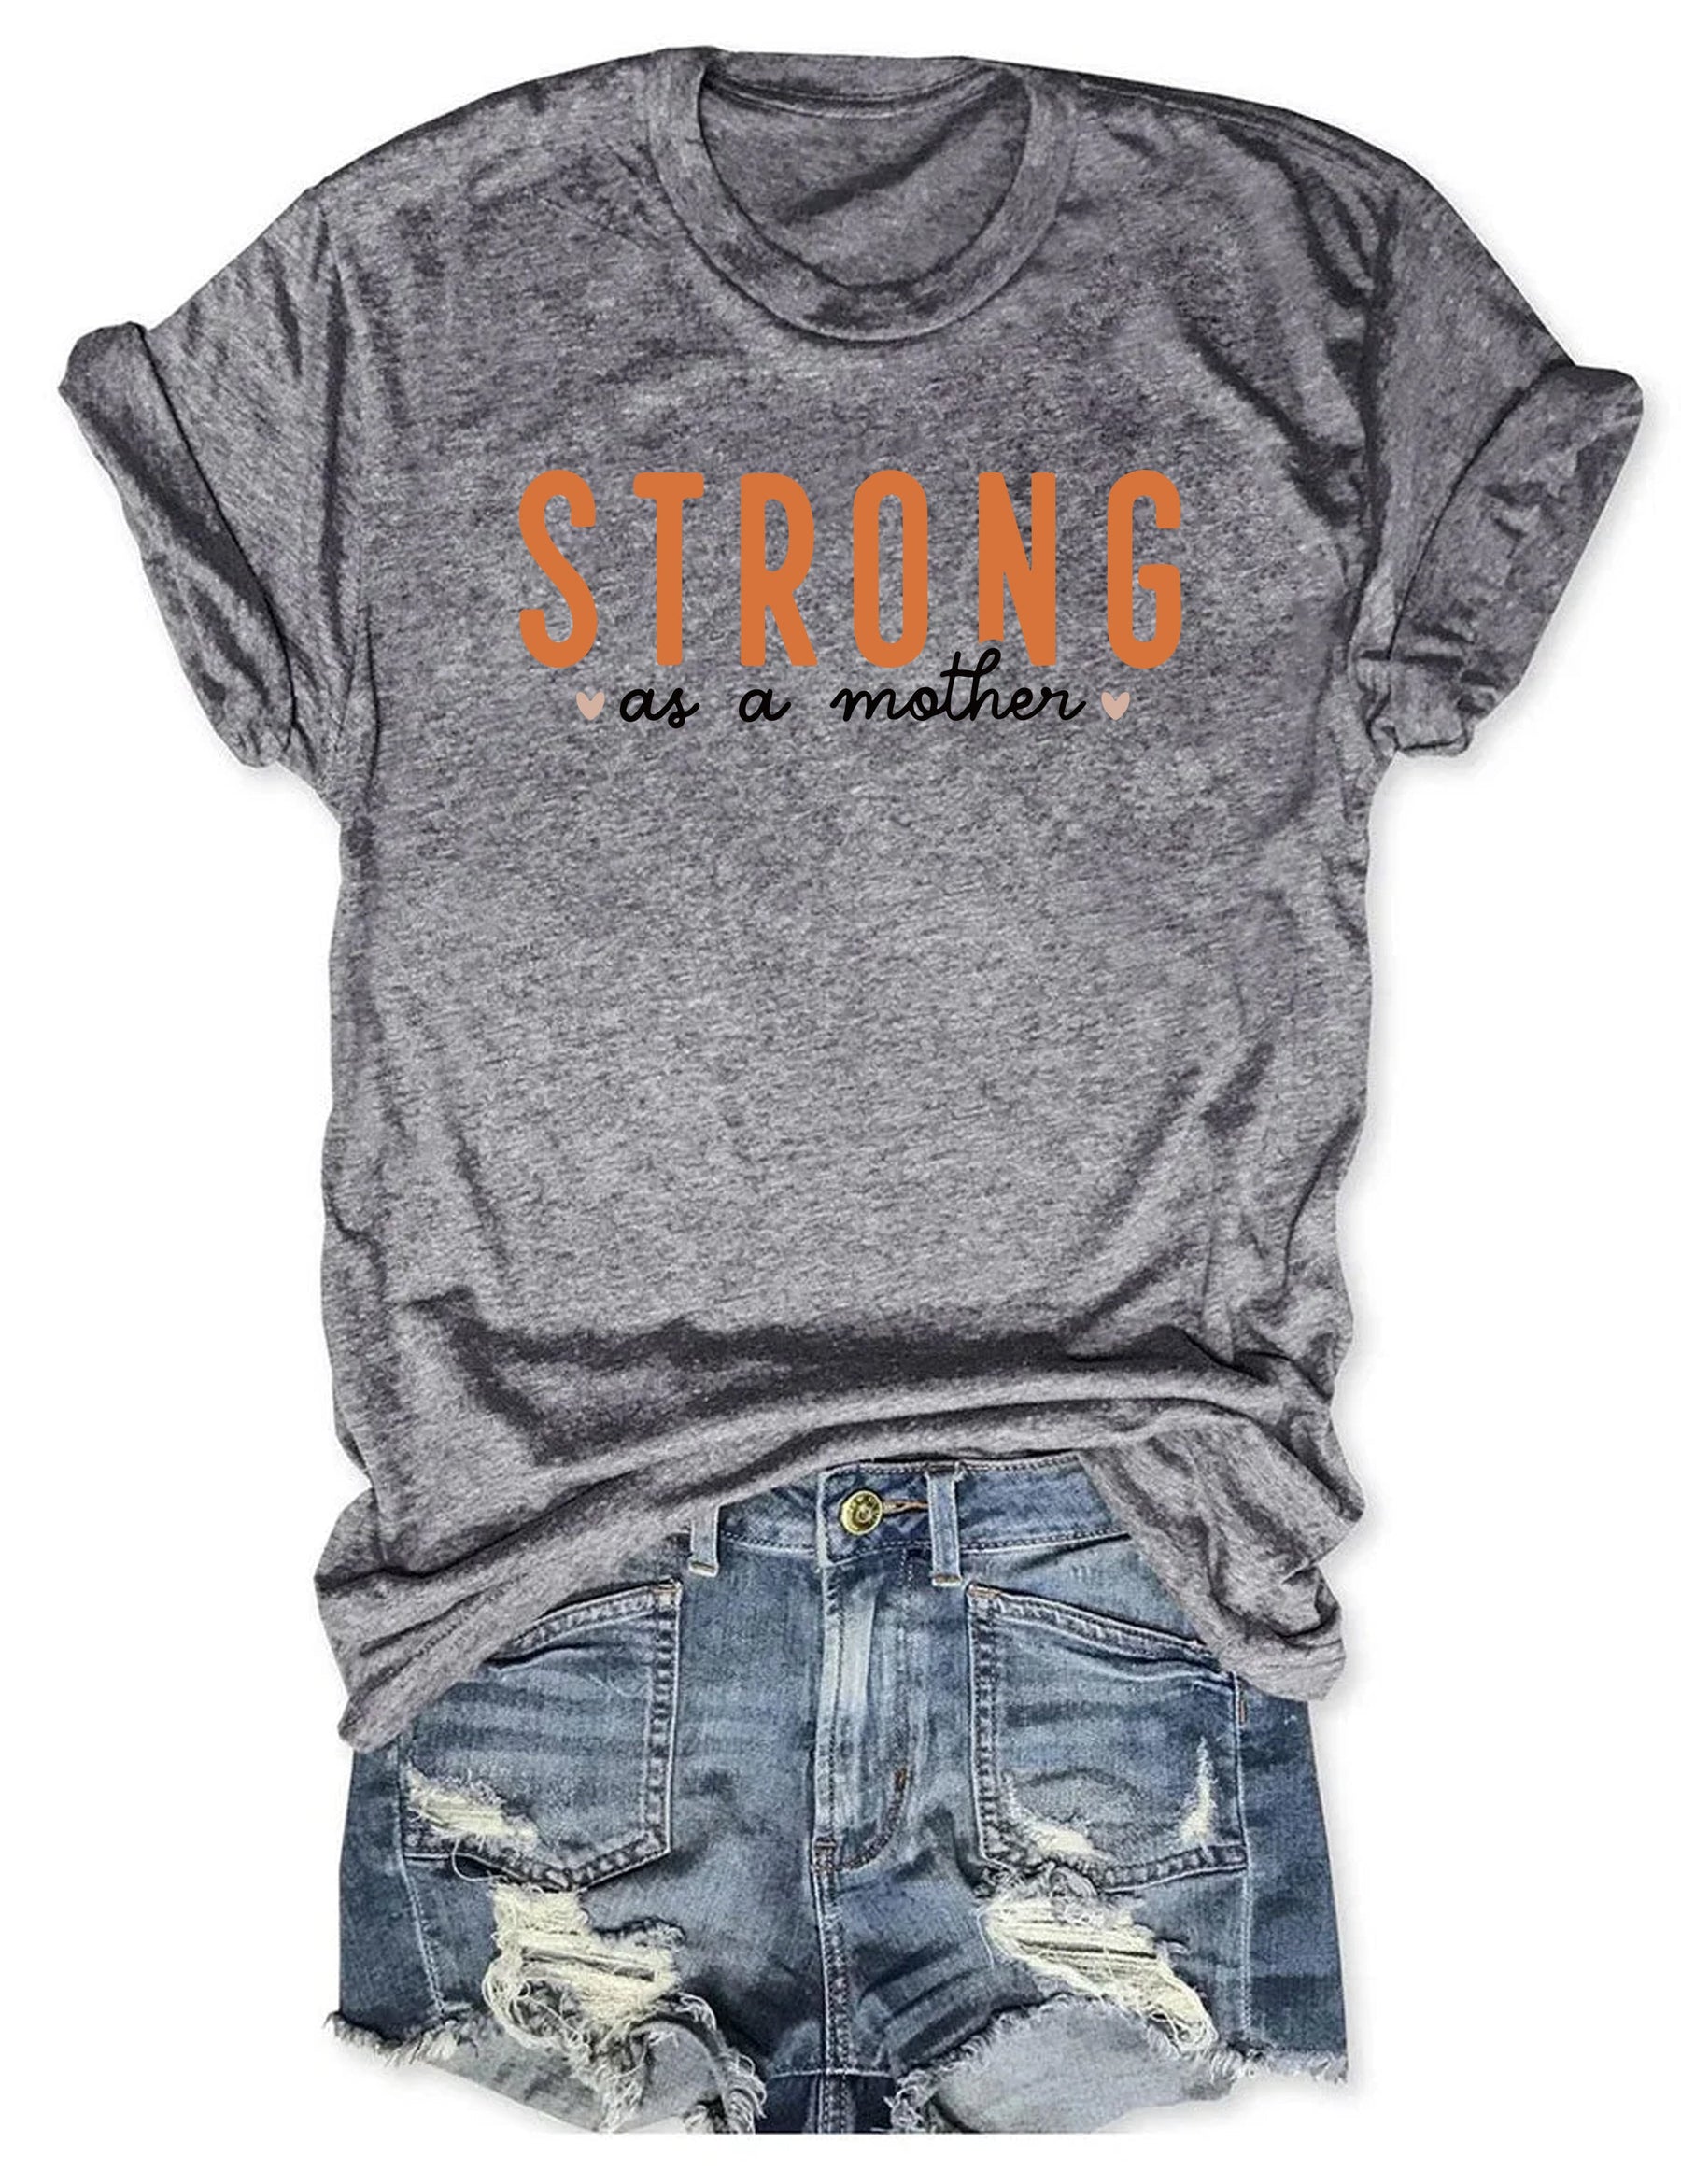 Mom Is Strong Beautiful Fearless T-shirt